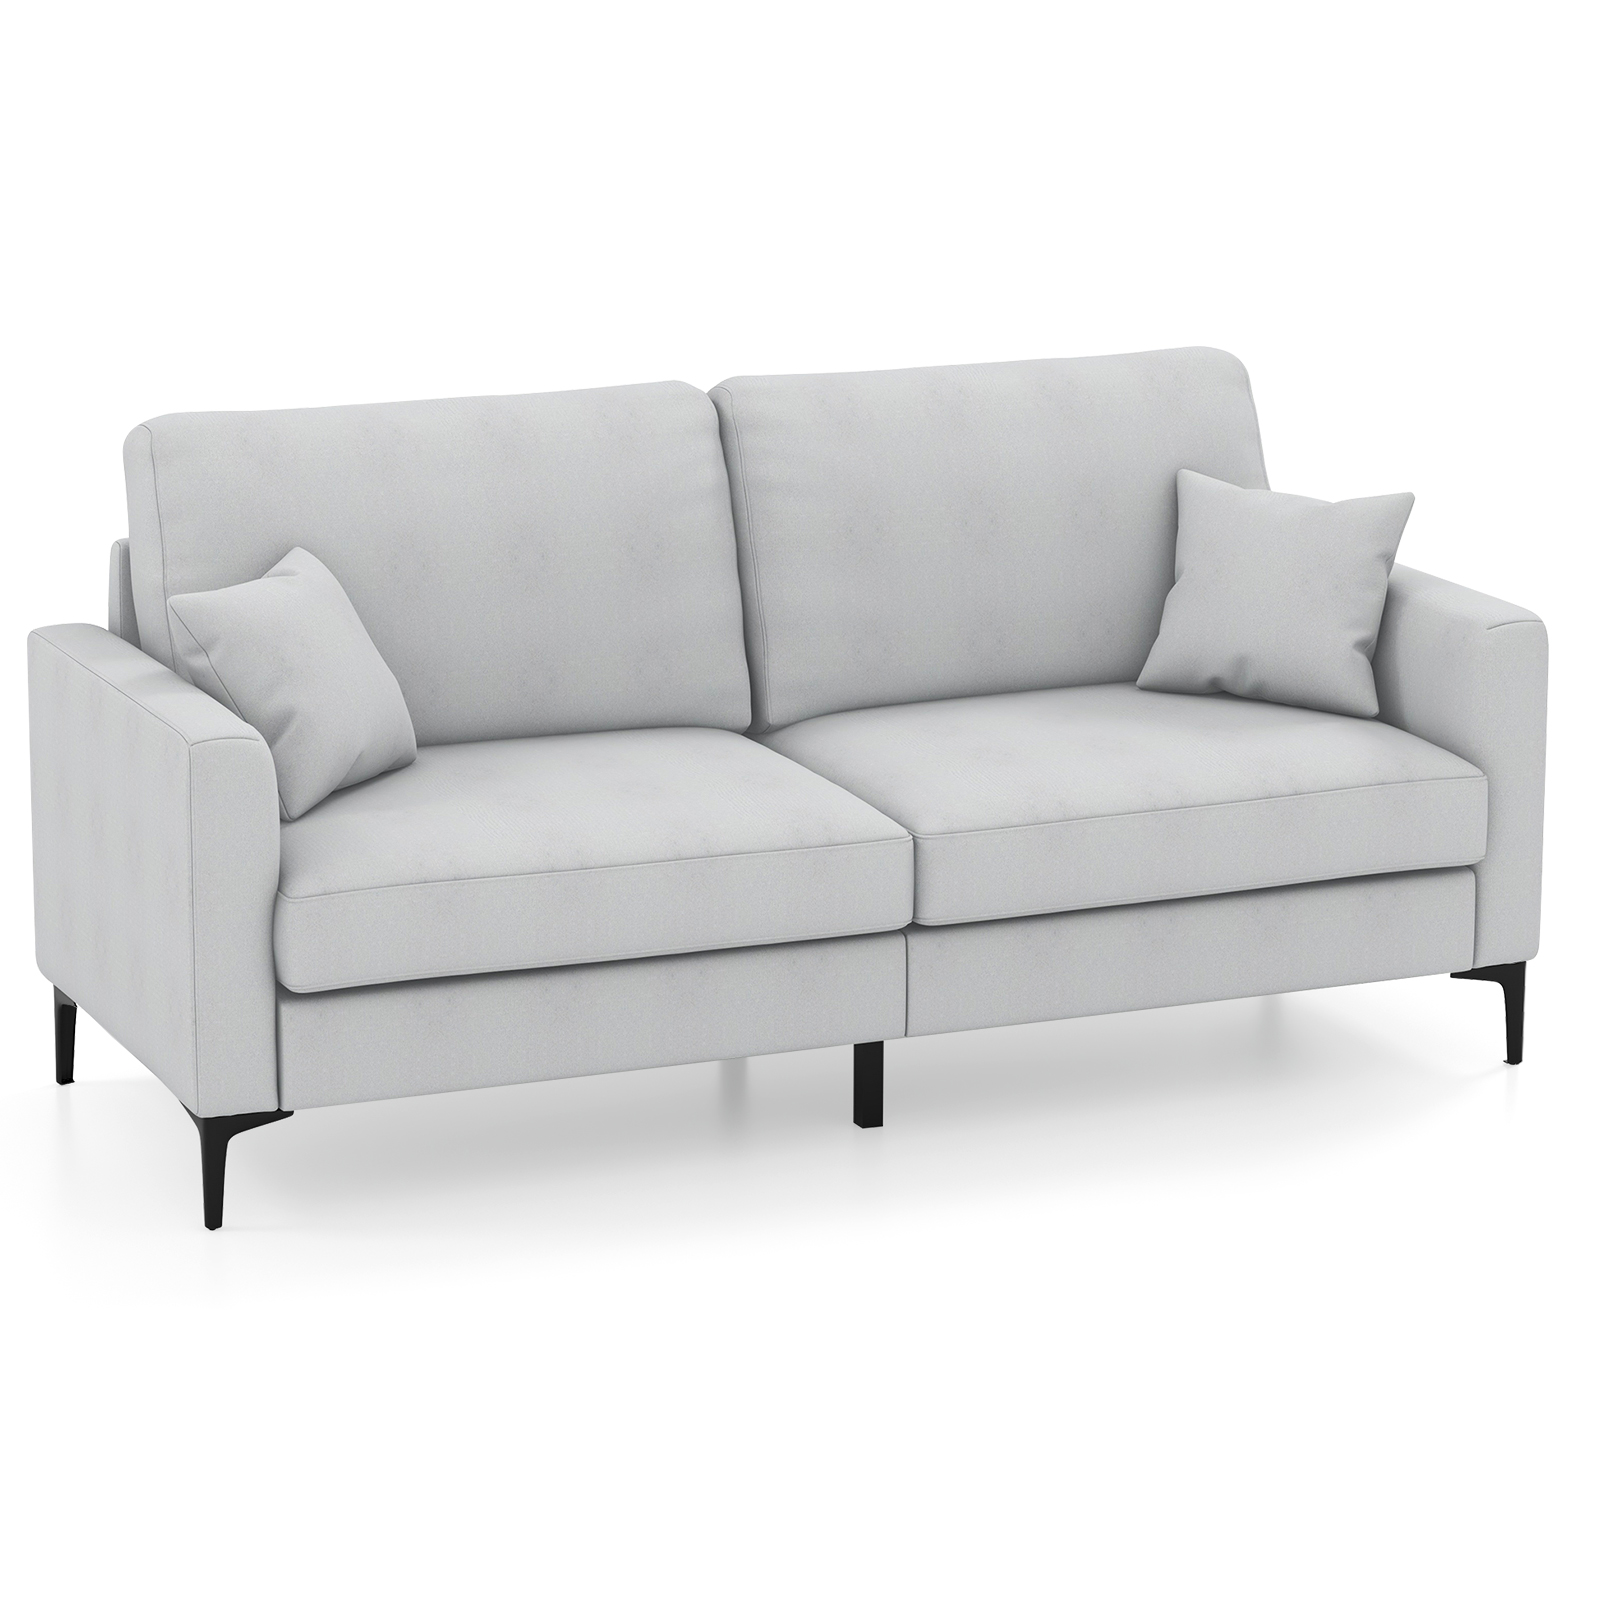 191cm Wide Upholstered Loveseat Sofa with Armrest and Pillows-Grey